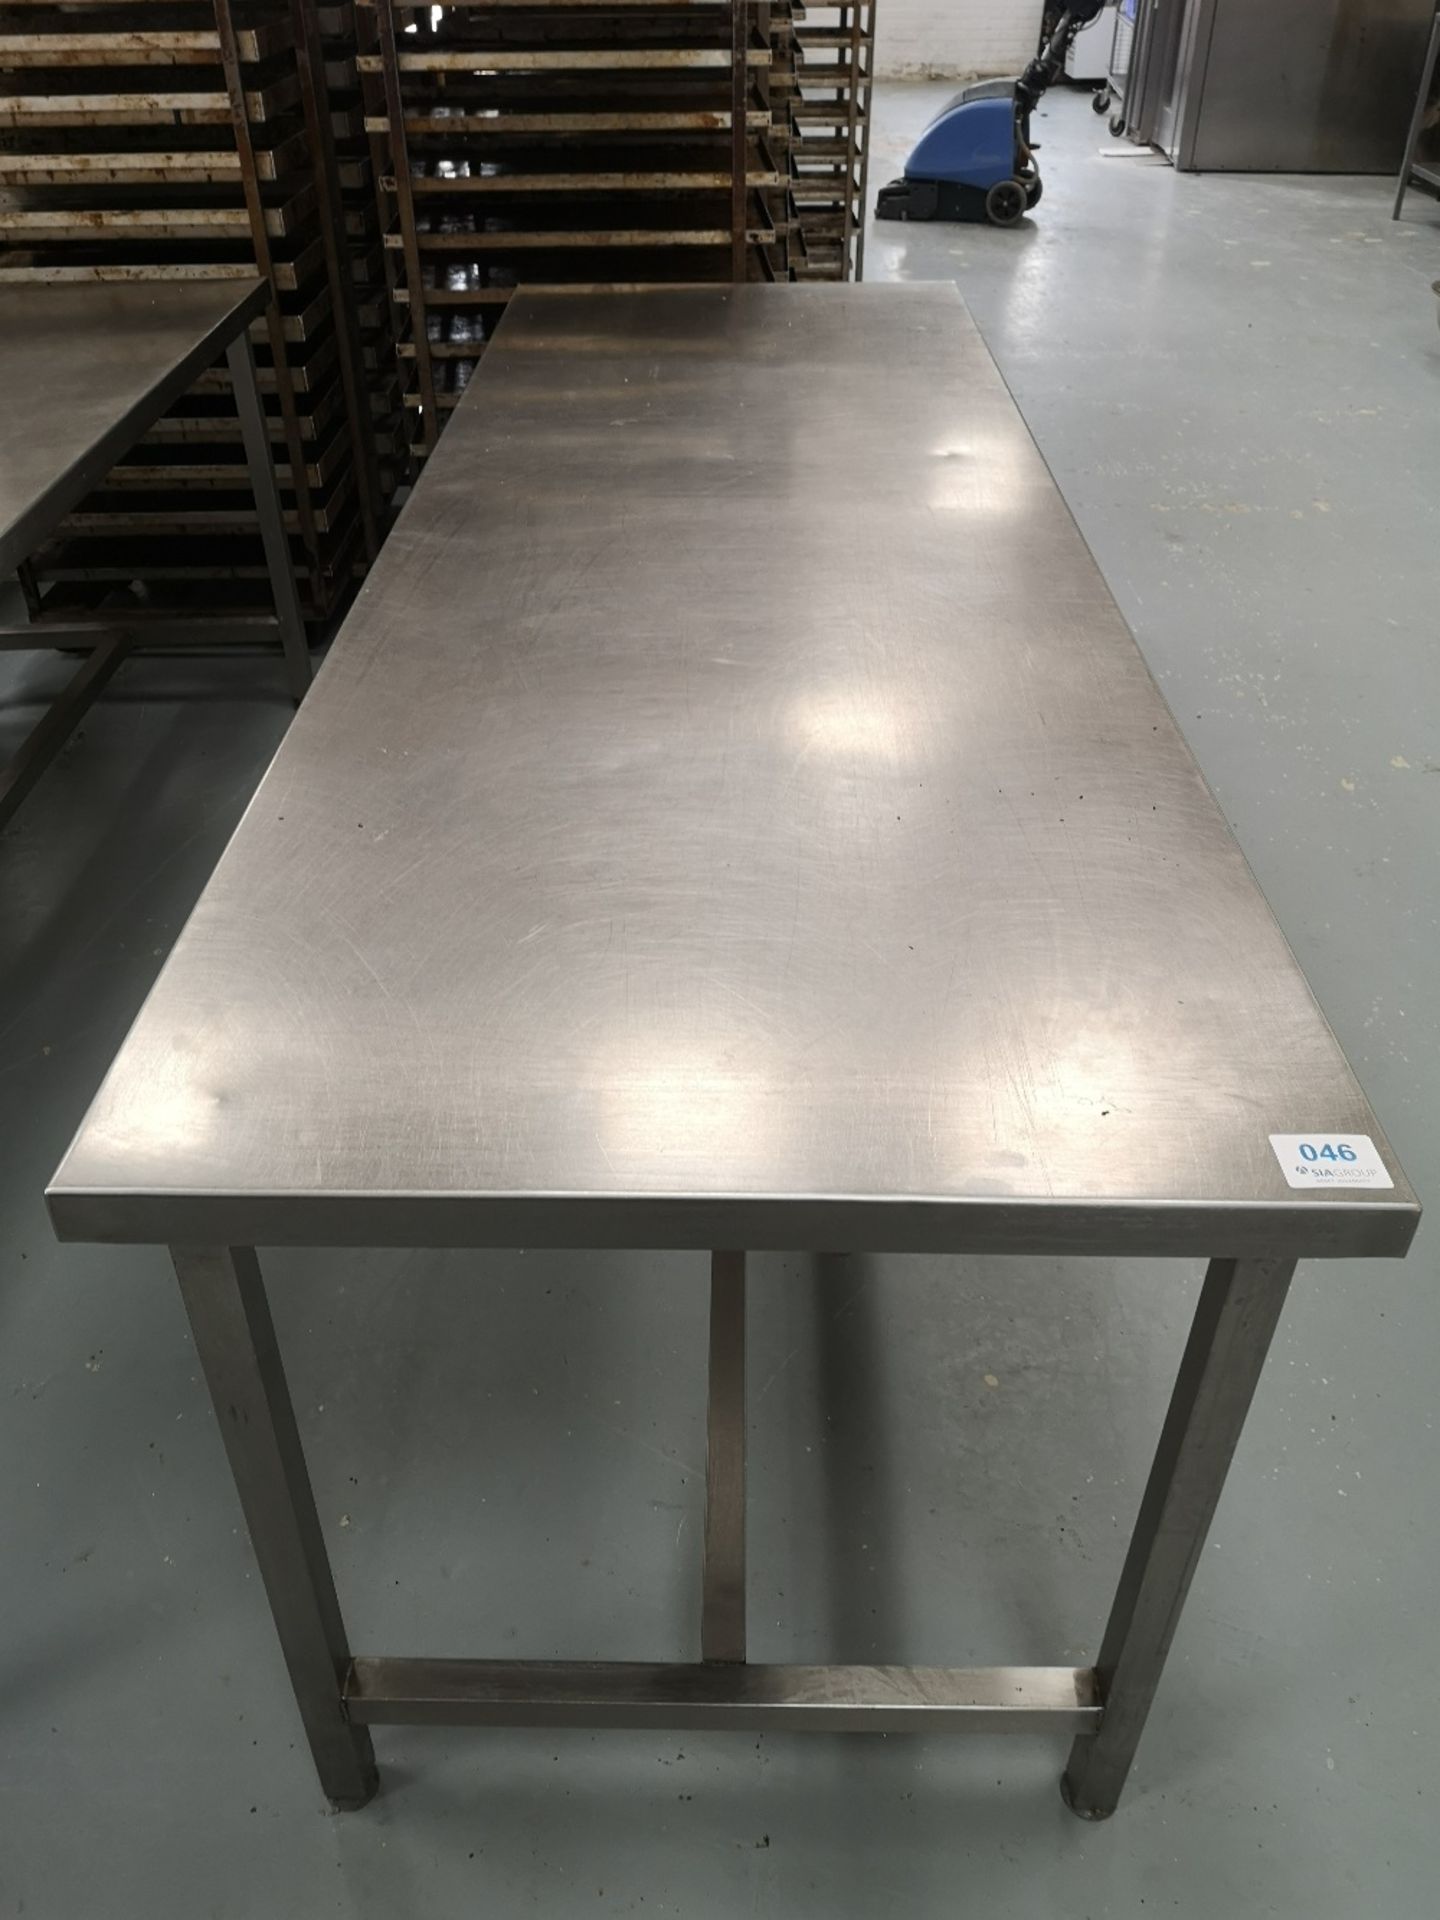 Stainless Steel Preparation Table - Image 3 of 3